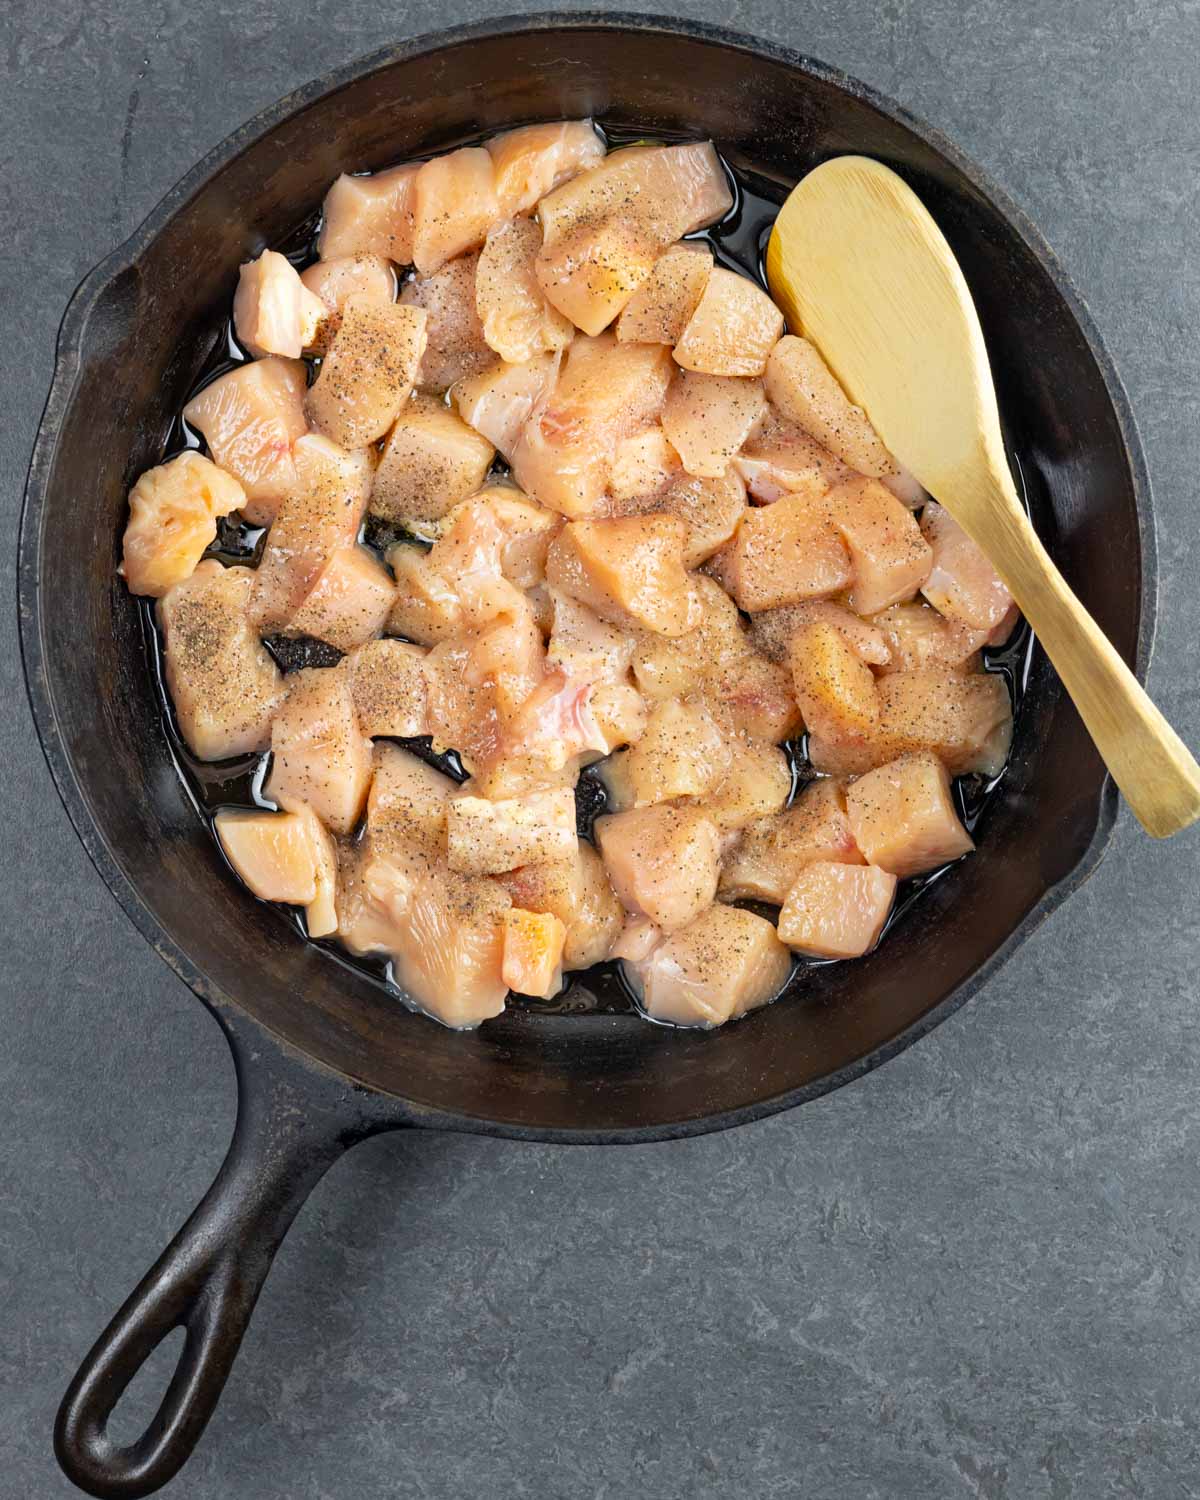 Diced chicken in a cast iron pan with a wood spoon ready to brown.